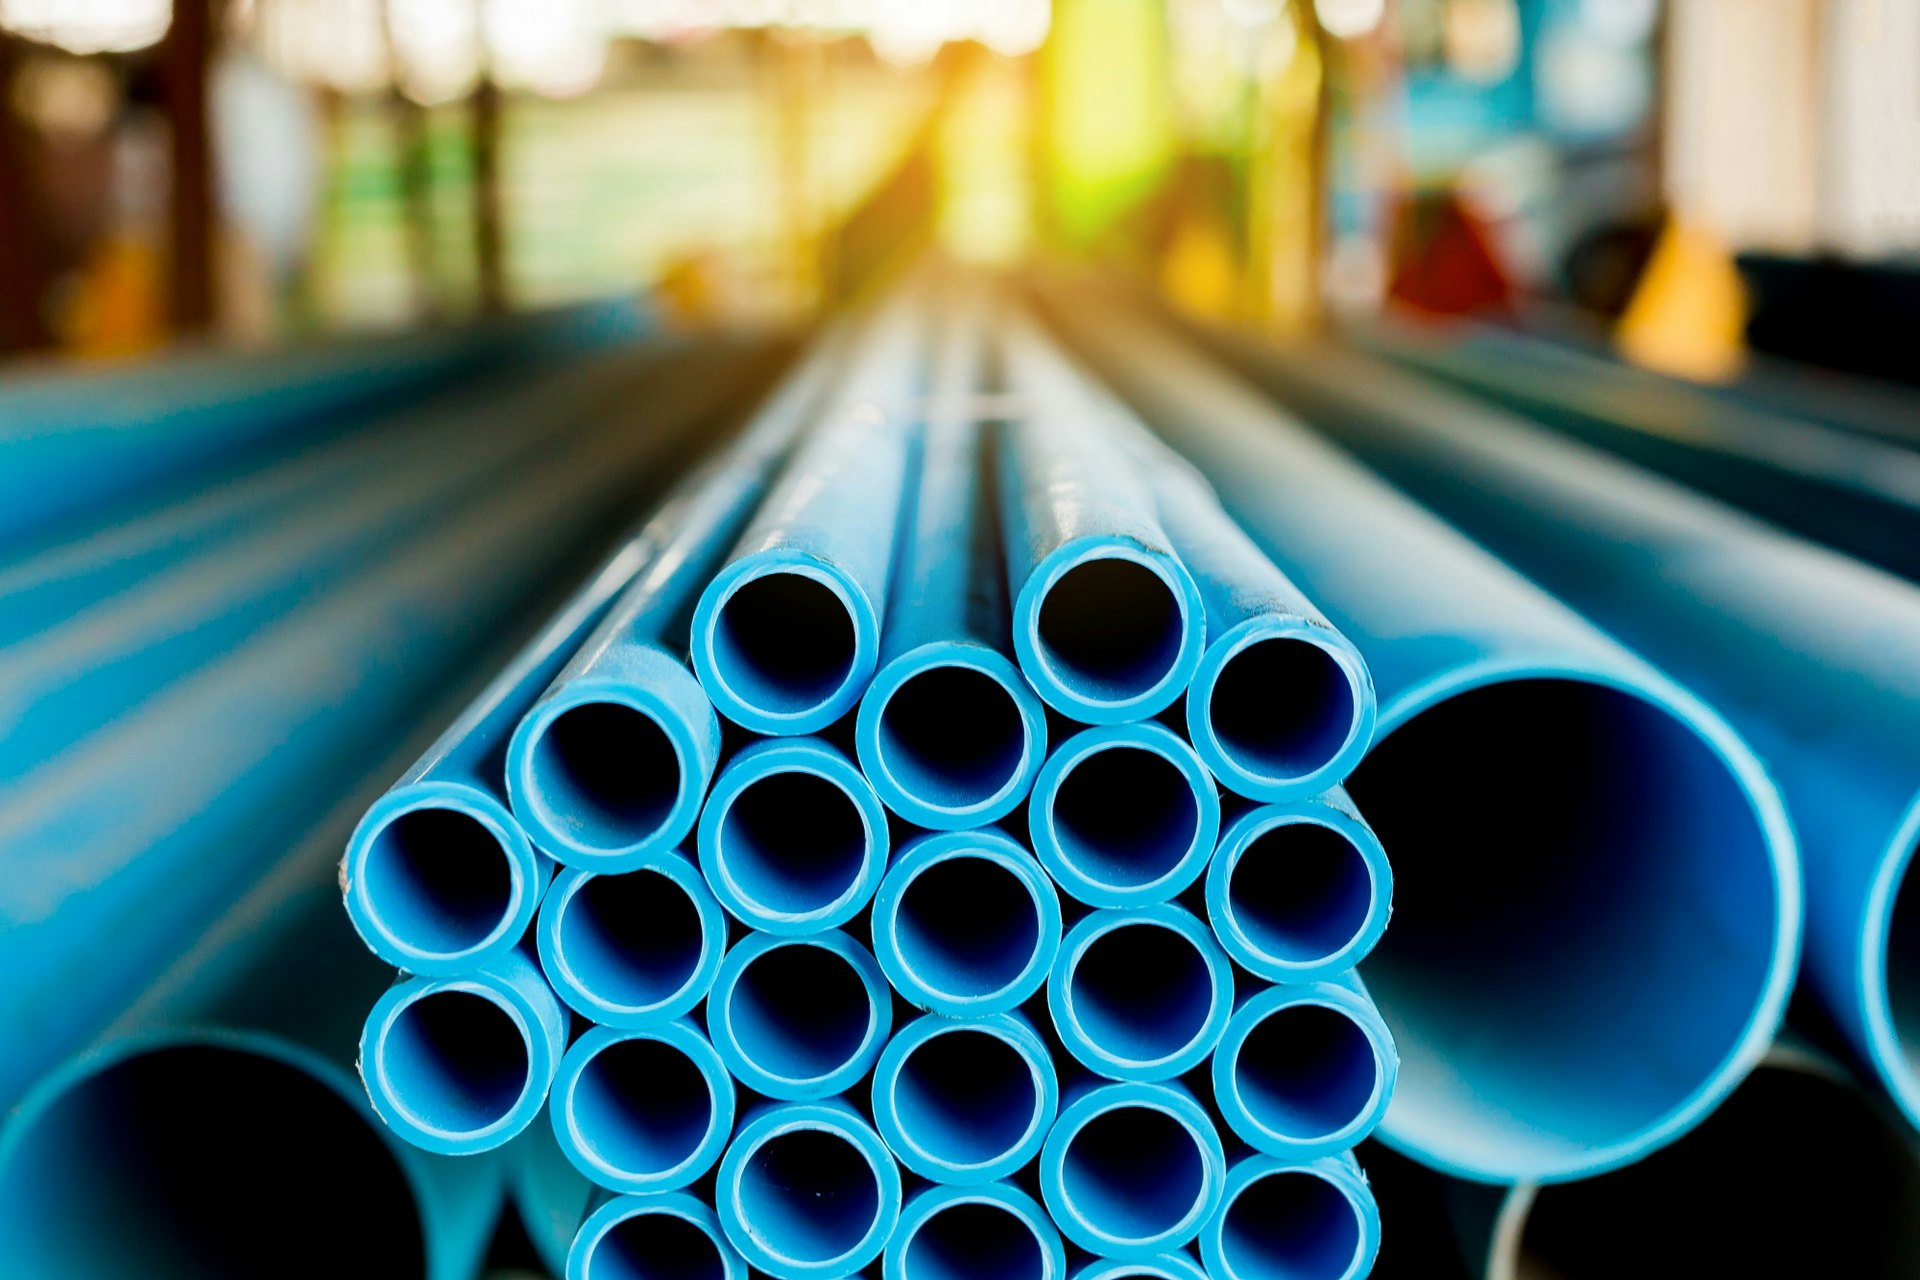 Common Uses of PVC Piping in Construction Environments | Construction Pros